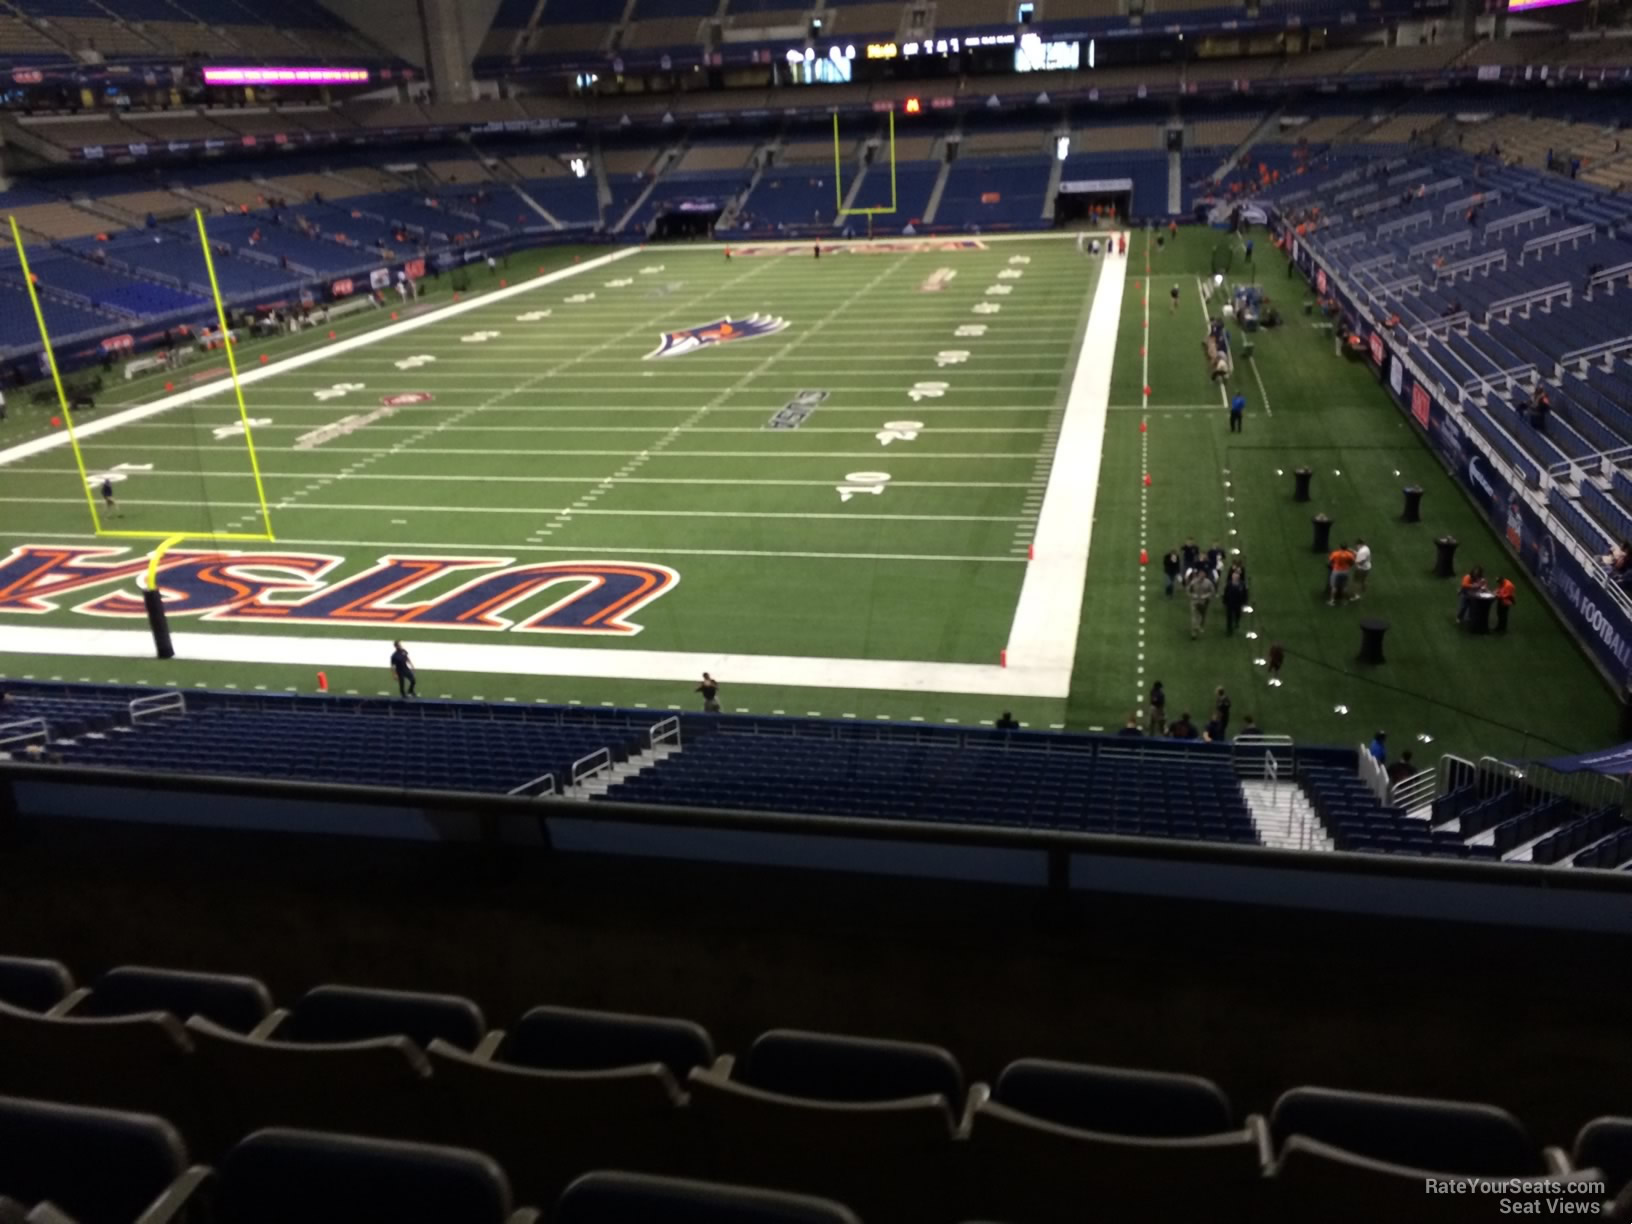 section 243, row 5 seat view  for football - alamodome